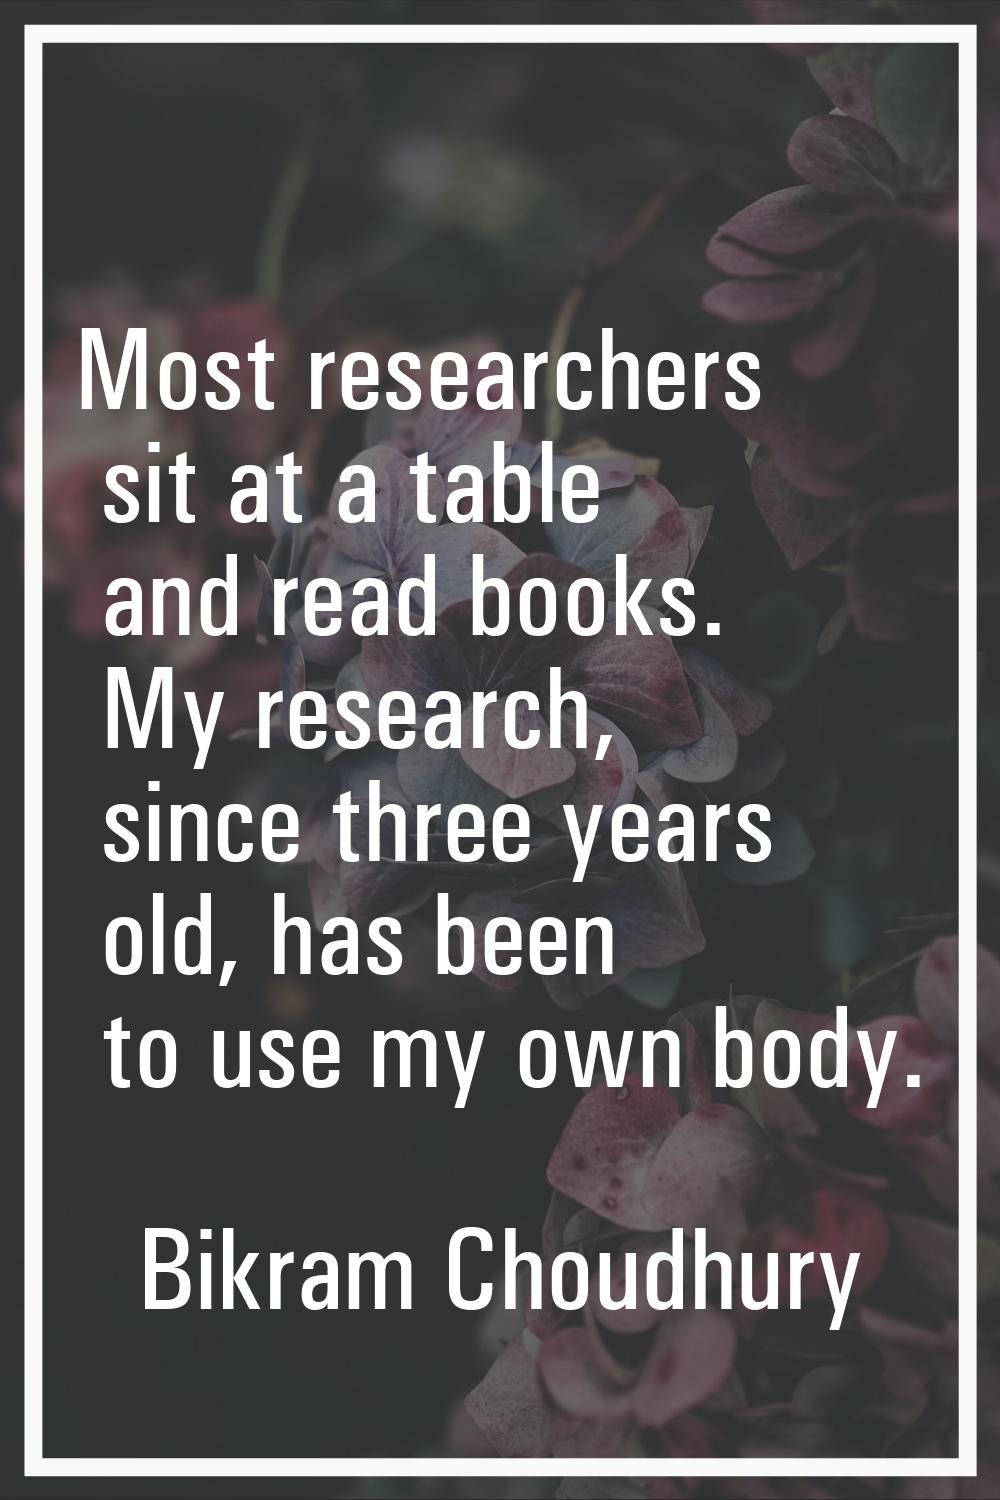 Most researchers sit at a table and read books. My research, since three years old, has been to use